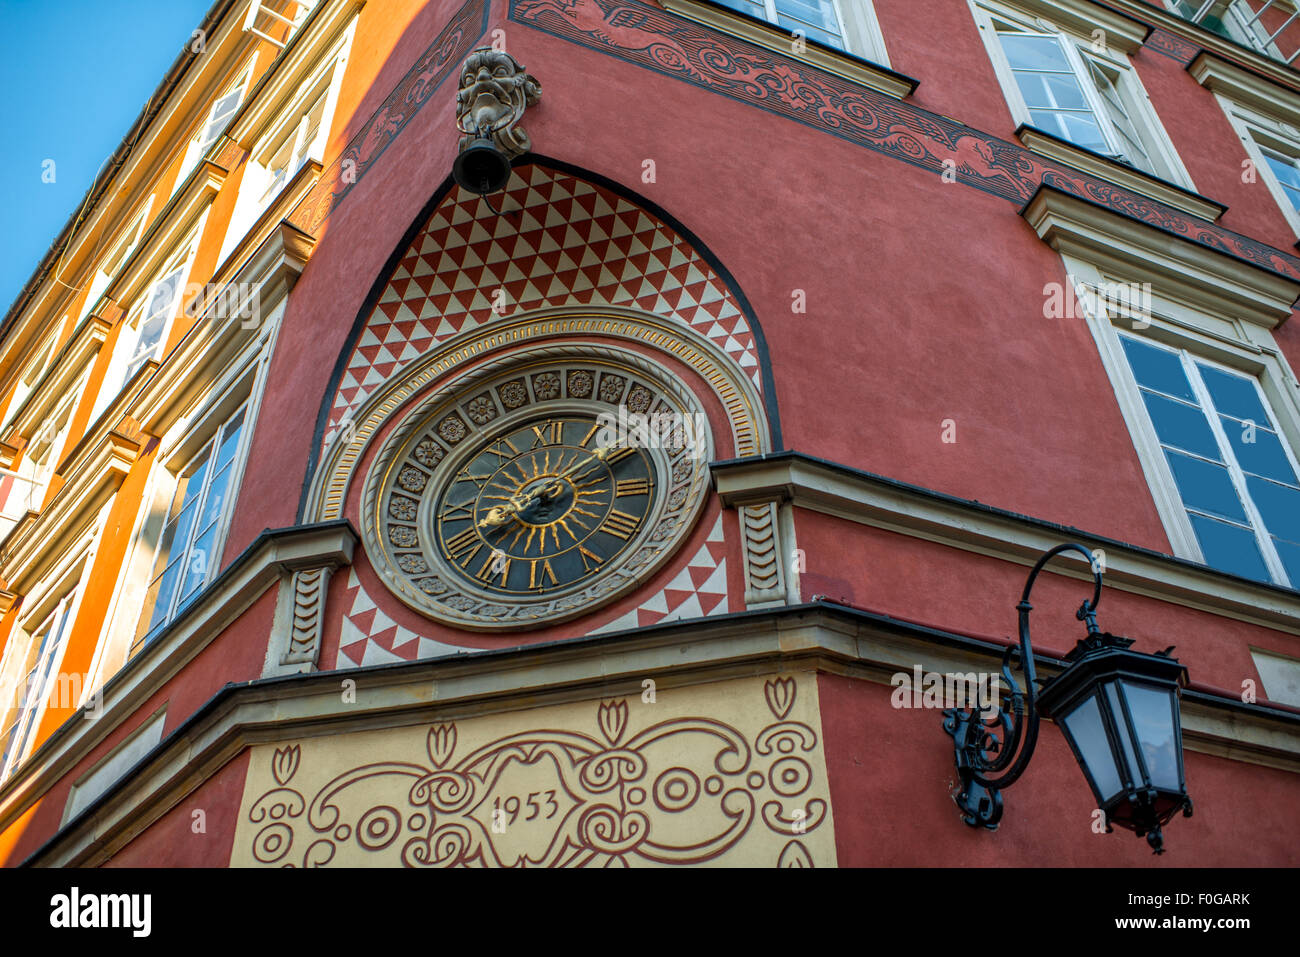 Old city clock in Warsaw Stock Photo